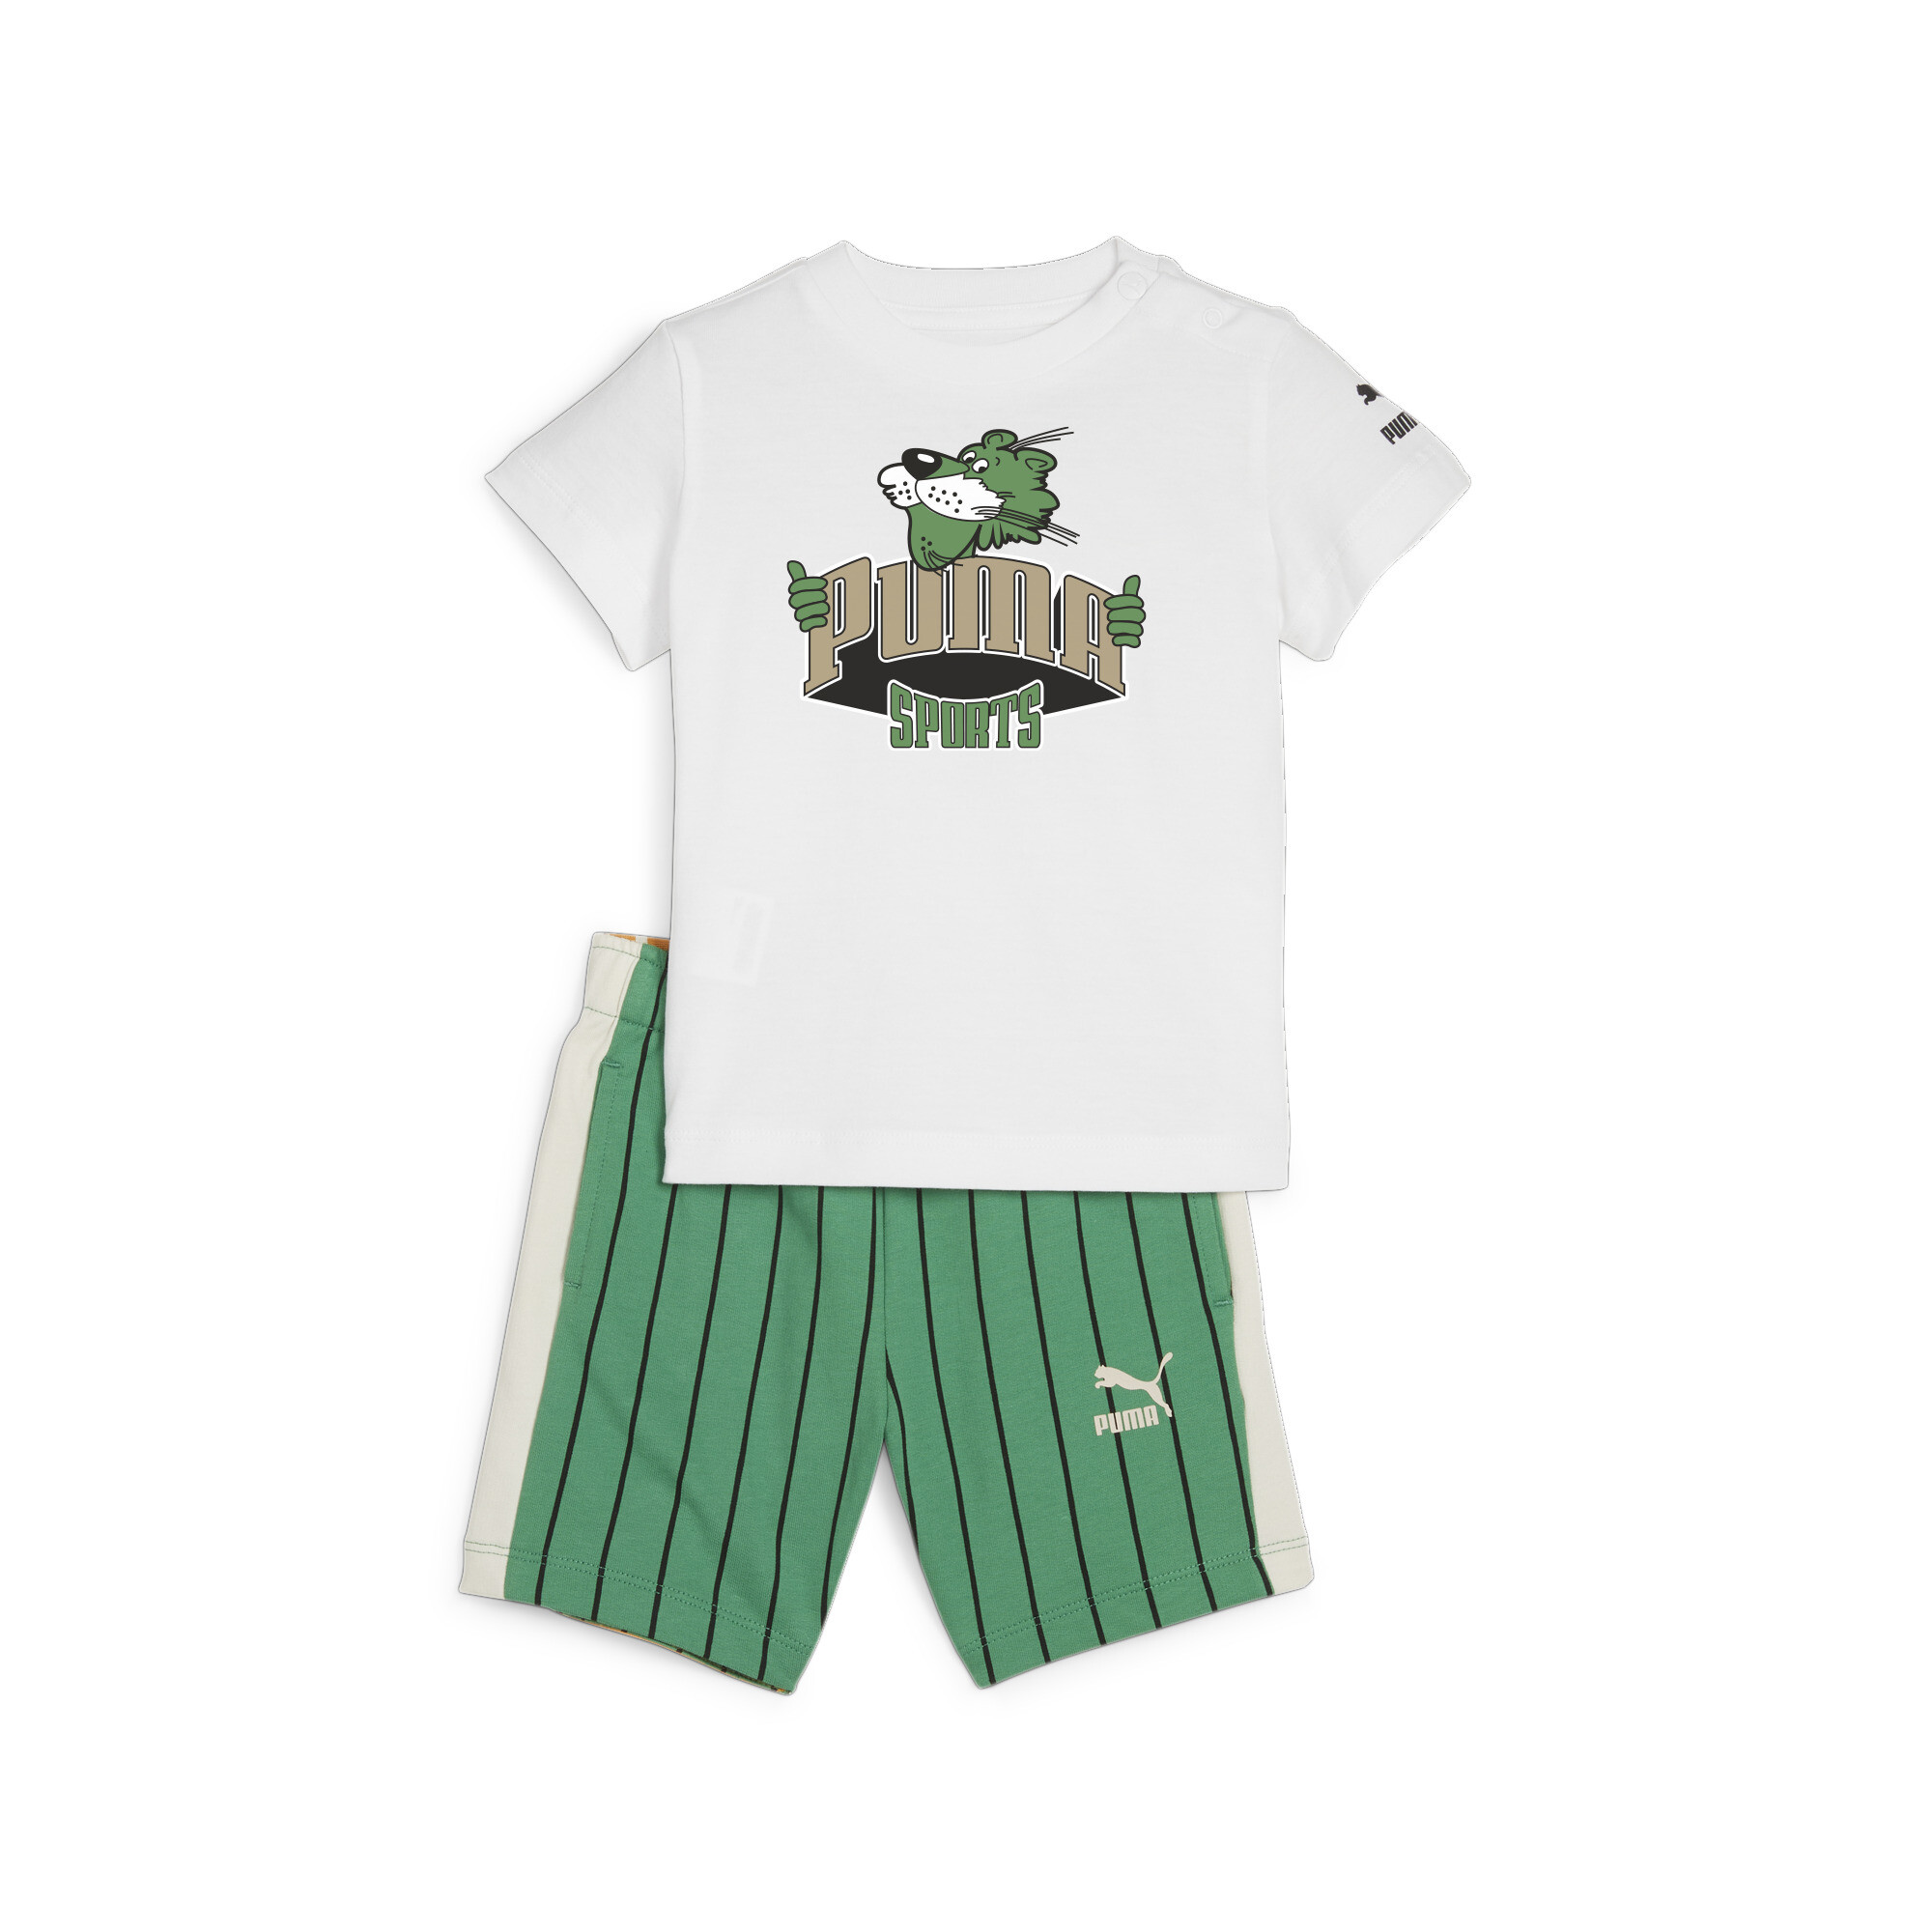 Kids' PUMA MINICATS FANBASE Toddlers' Set In White, Size 9-12 Months